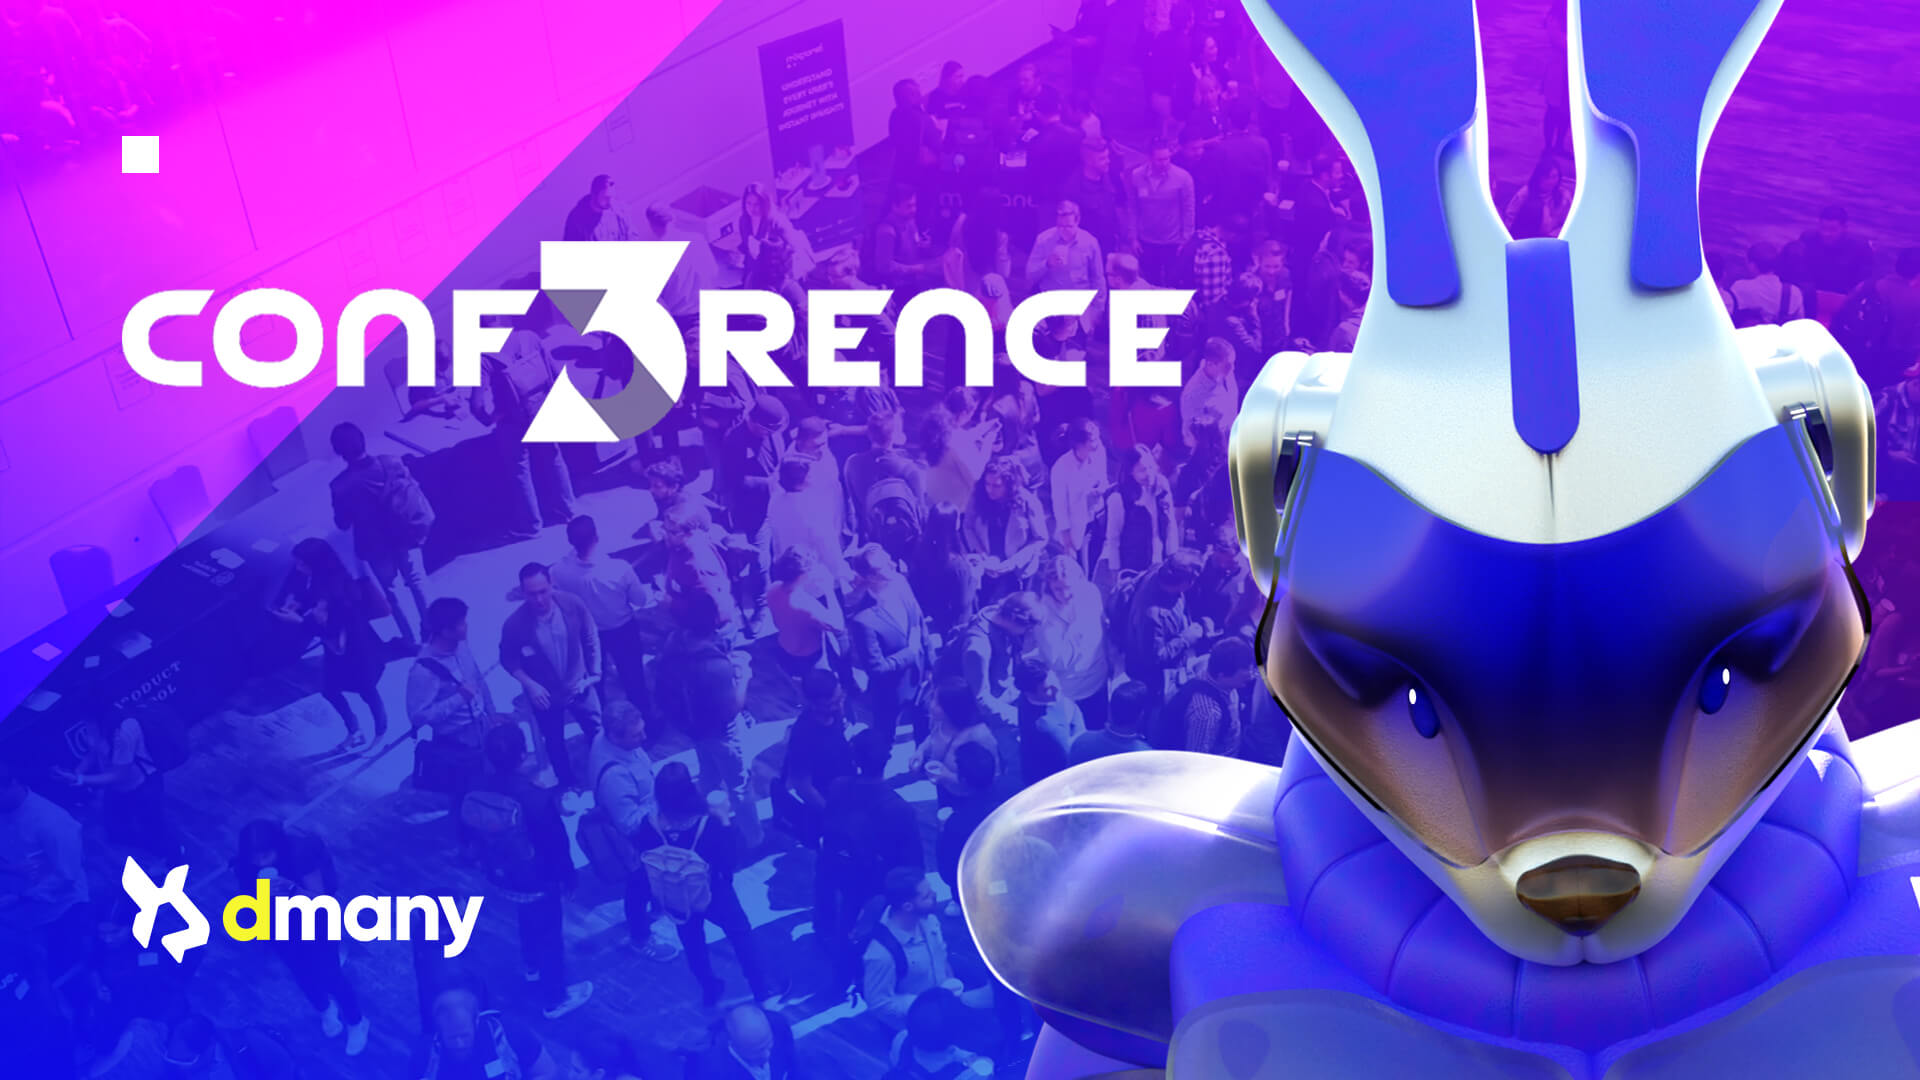 CONF3RENCE: A Success Story in Event Promotion with Dmany